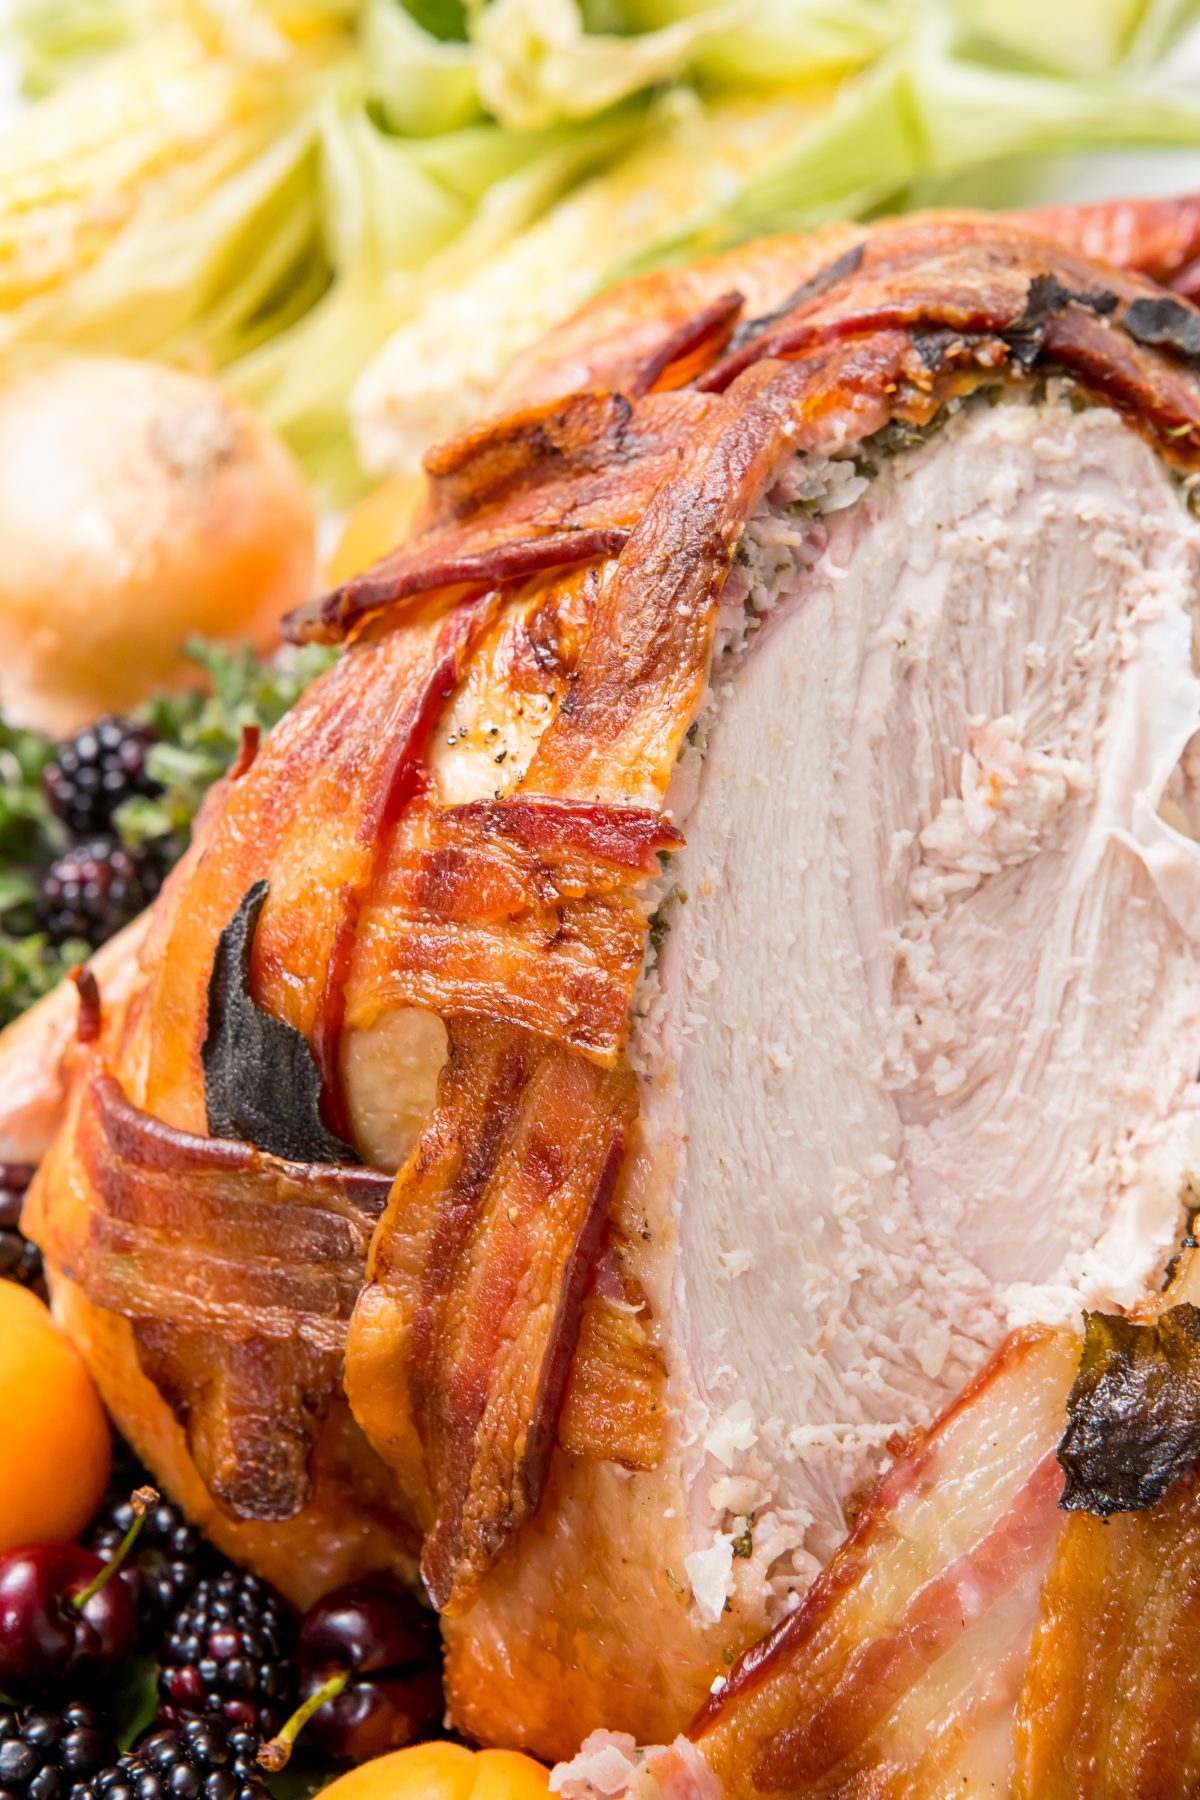 5D4B9791 - Bacon Wrapped Turkey - close-up of cooked bacon wrapped turkey